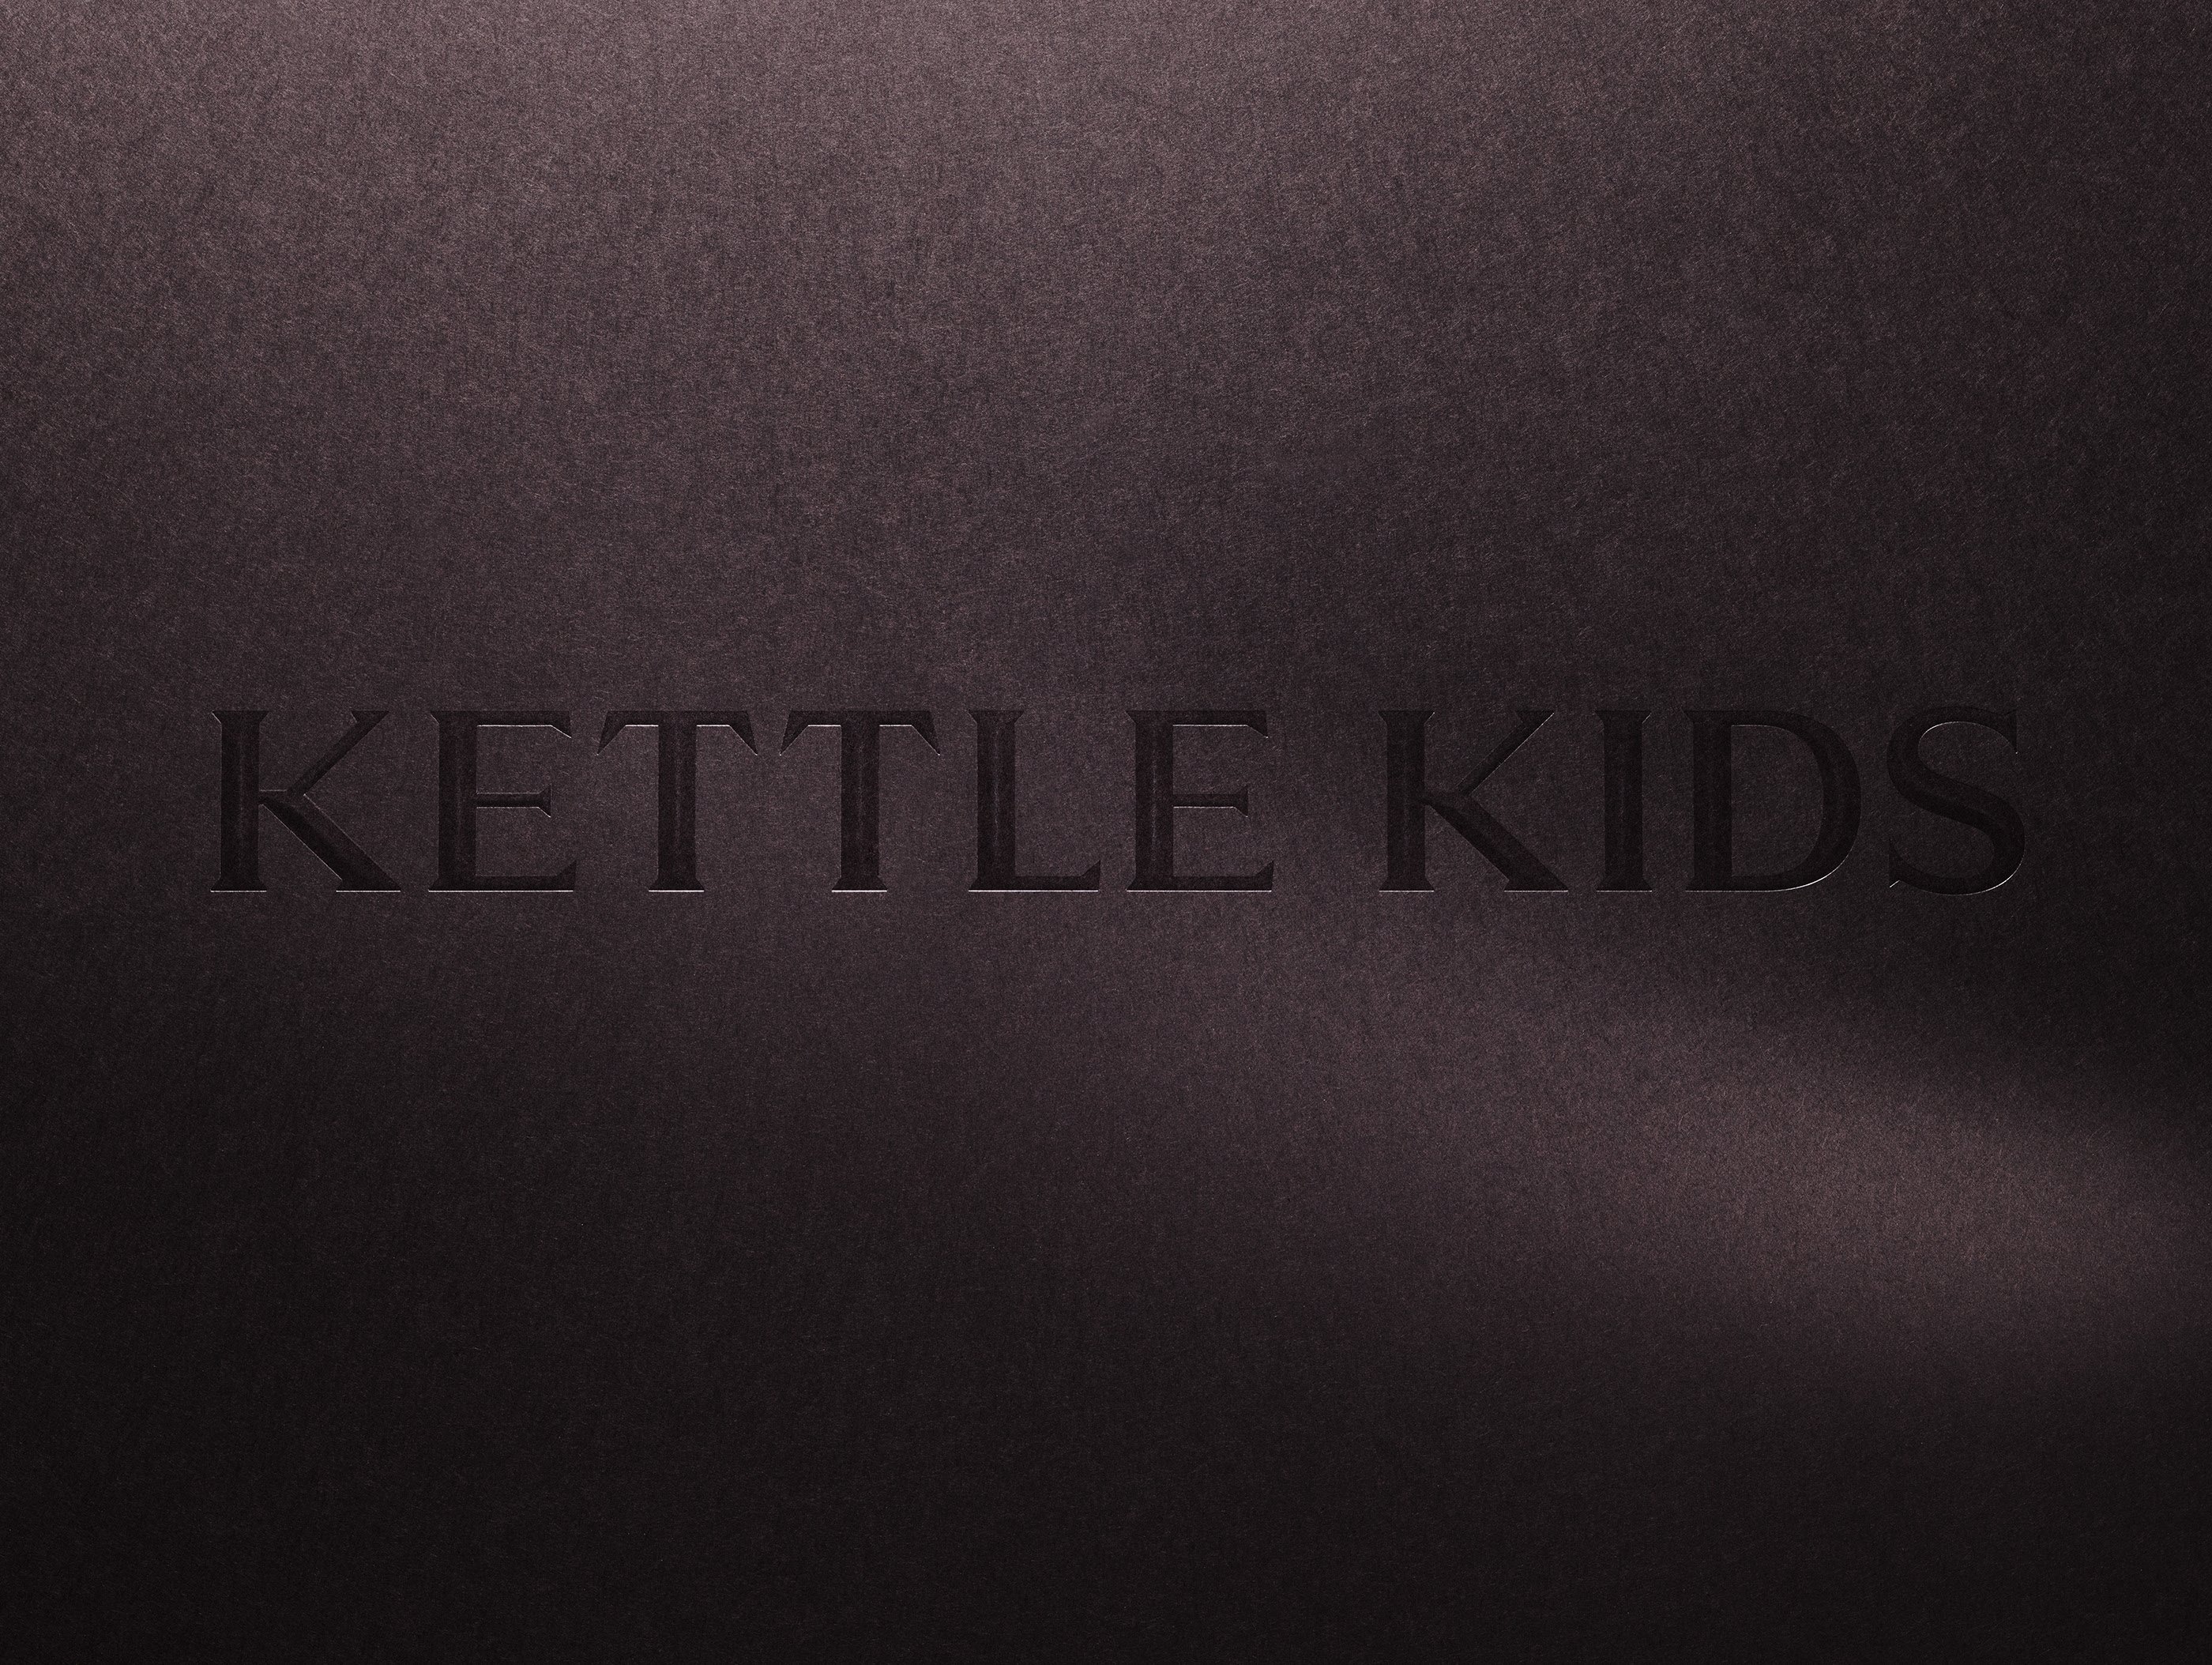 Monogram, logotype and custom typeface for London luxury watch retailer Kettle Kids designed by Two Time Elliott